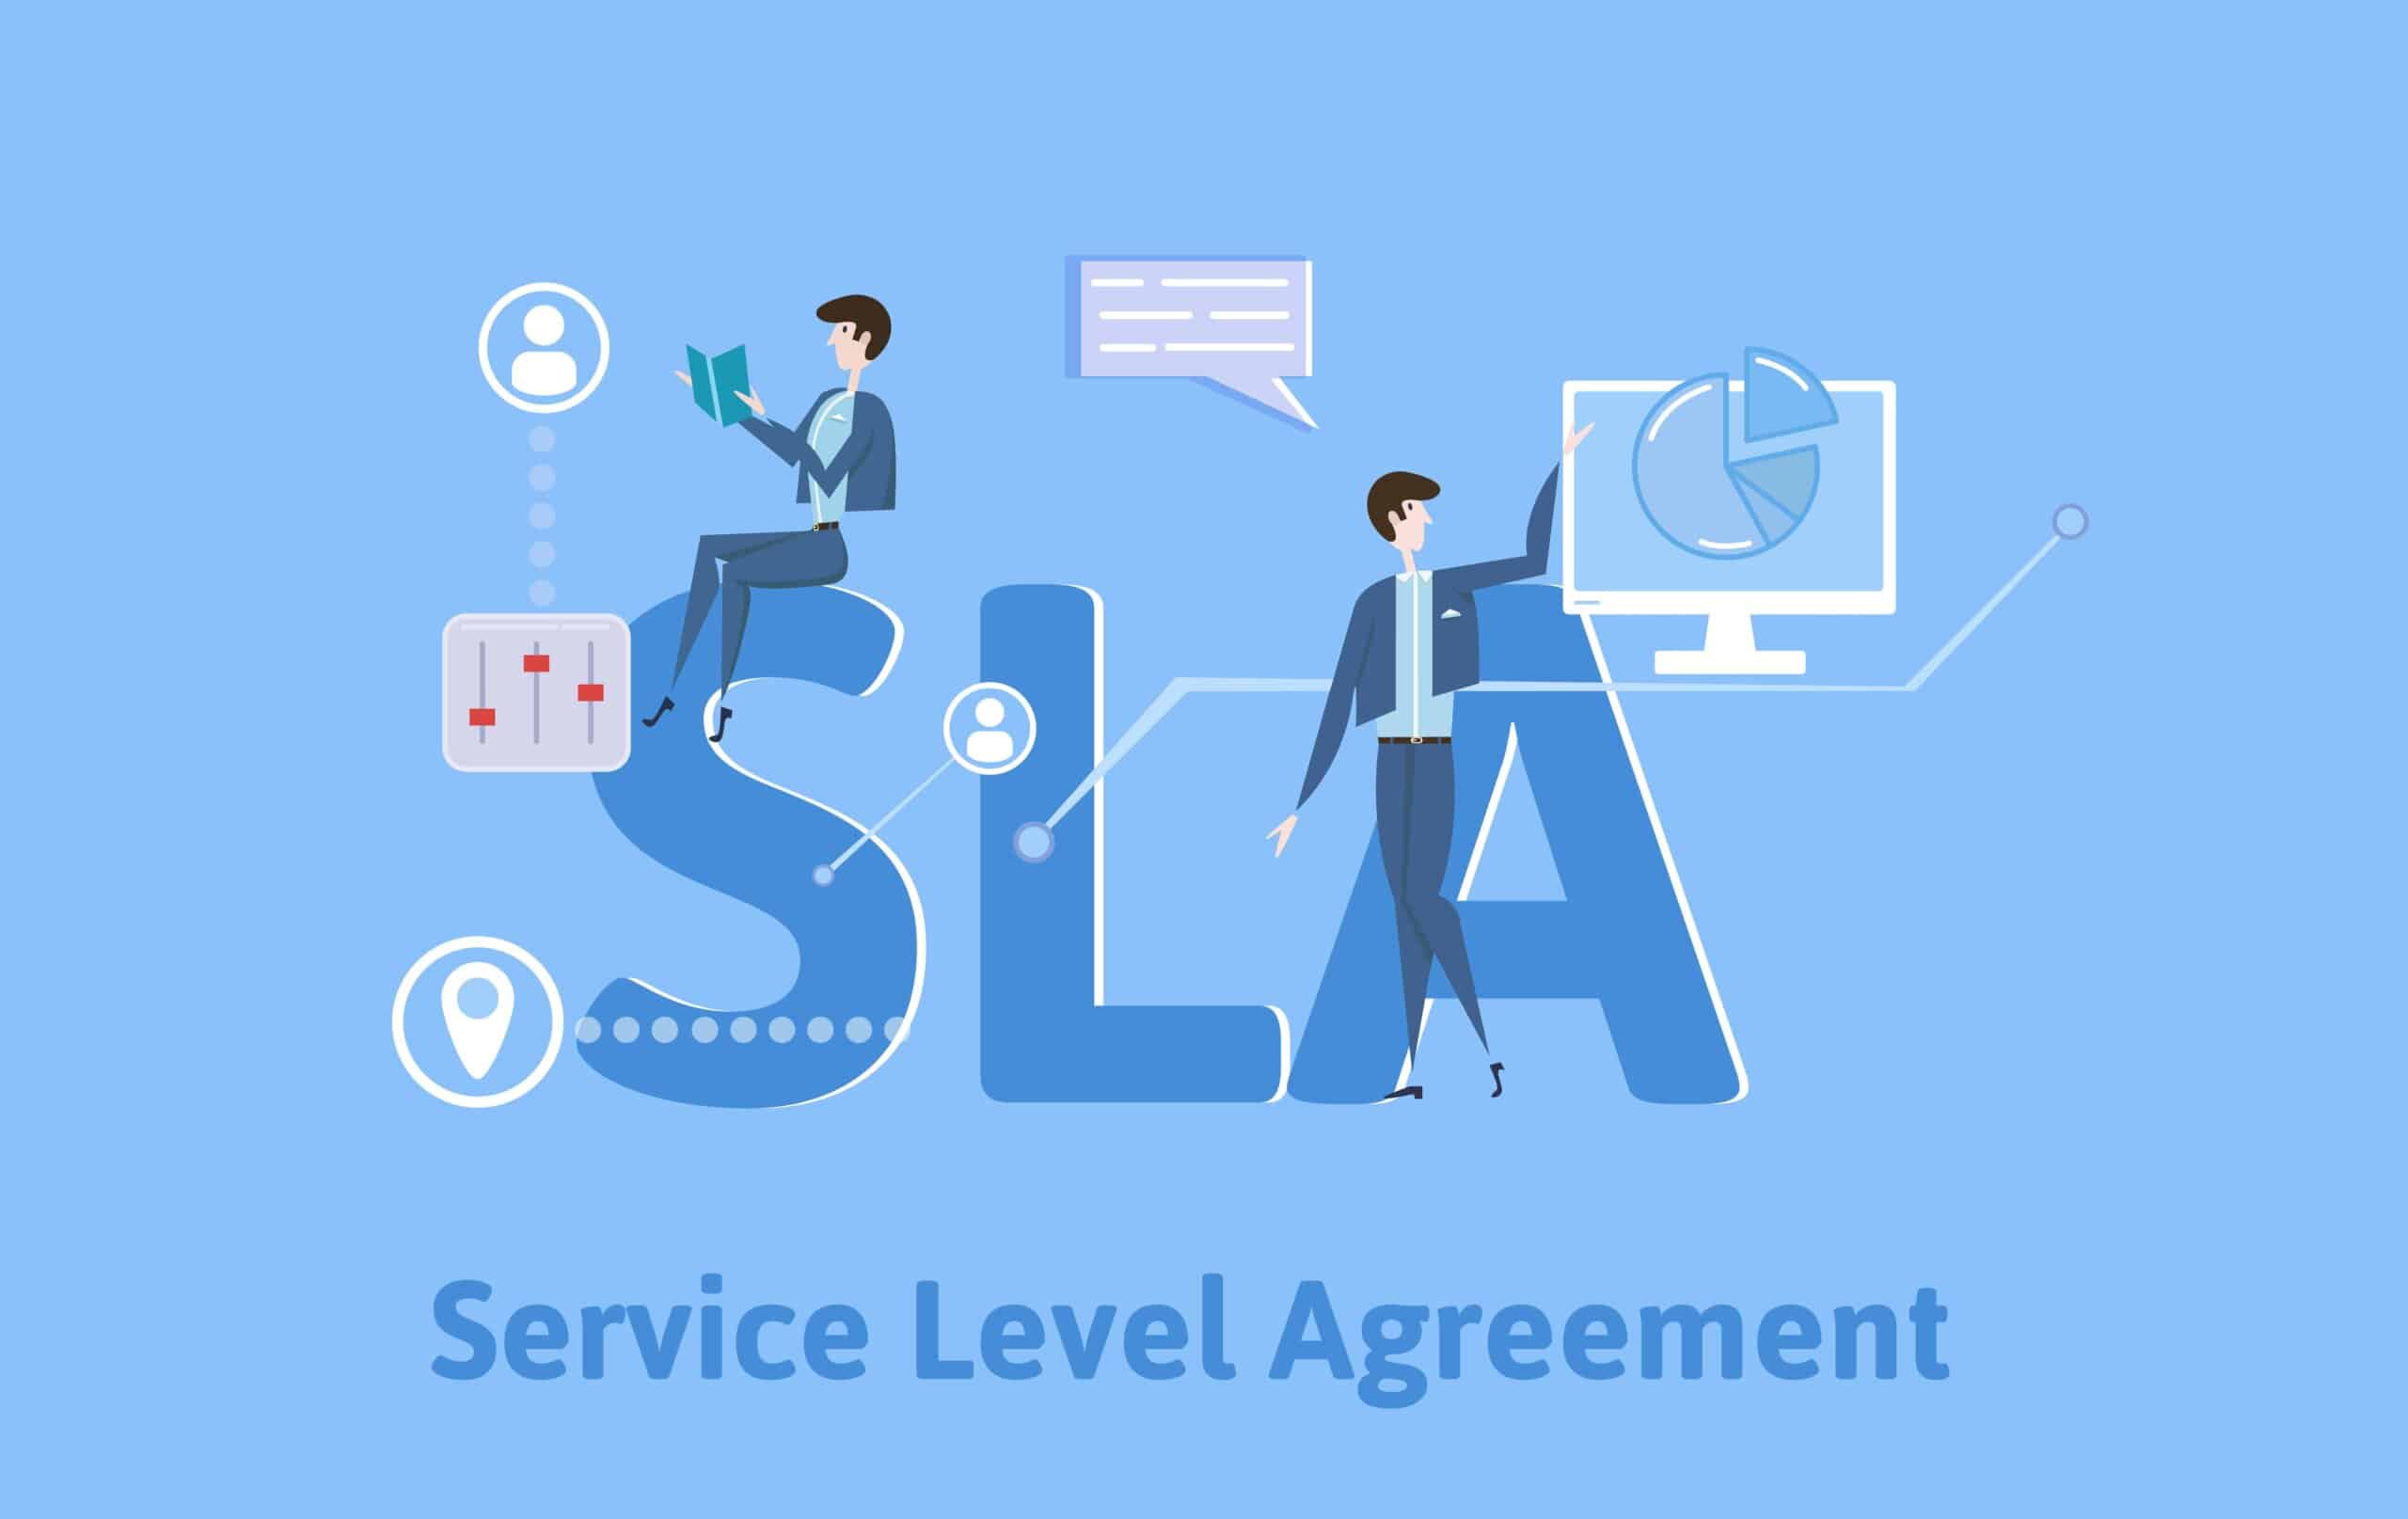 service level agreement graphic with business-related graphics.